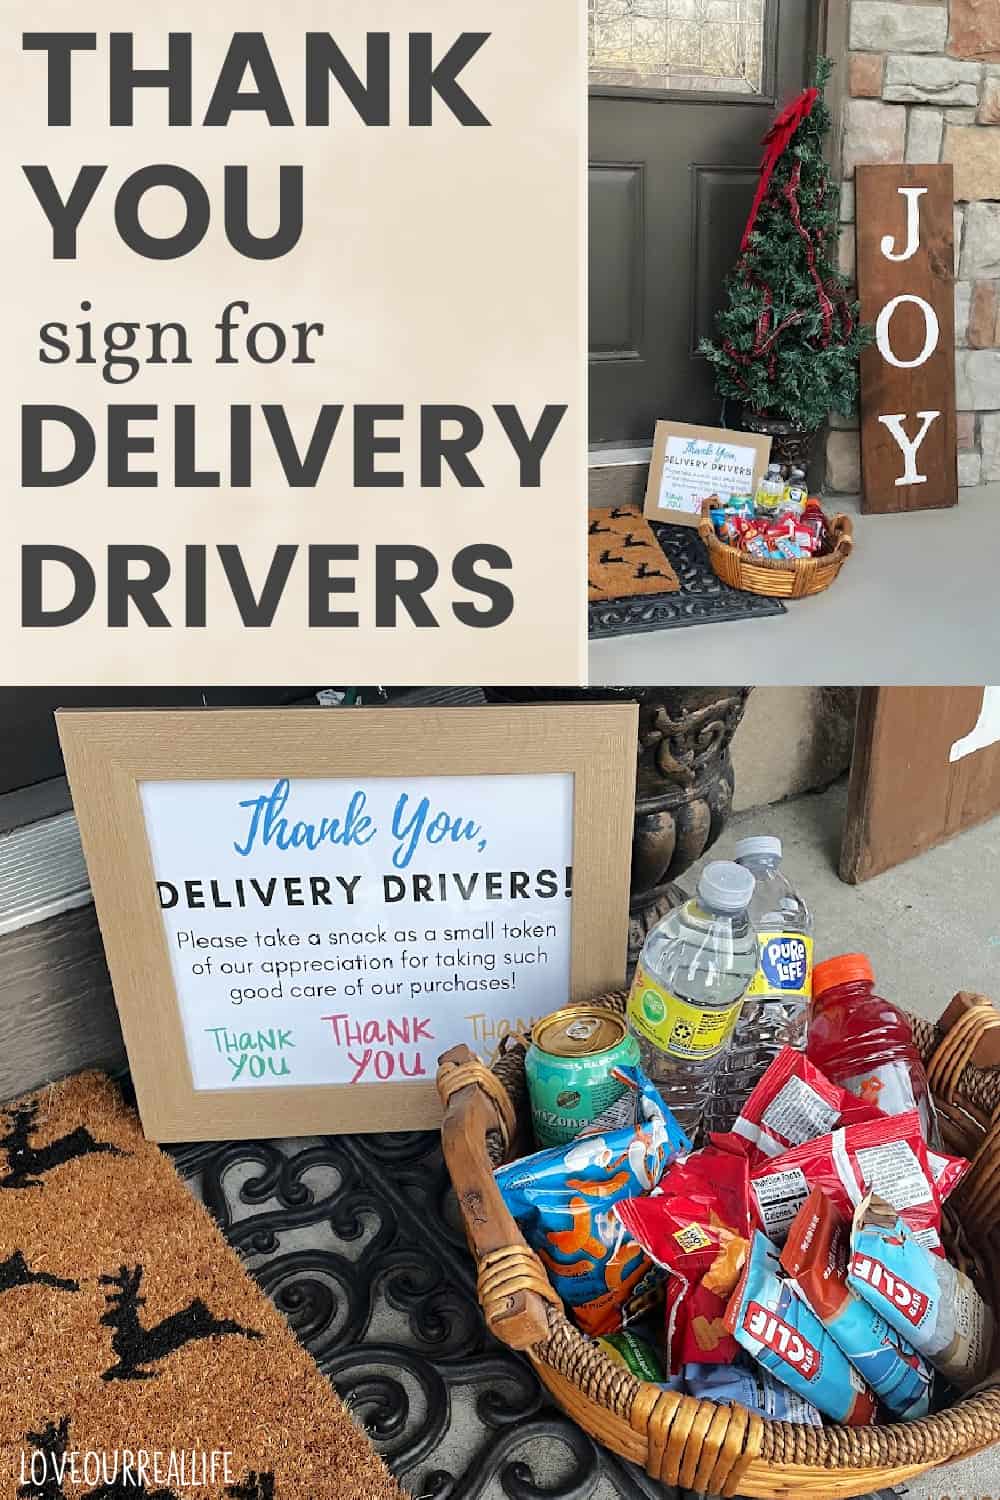 Front porch with basket of treats and thank you sign for delivery drivers.